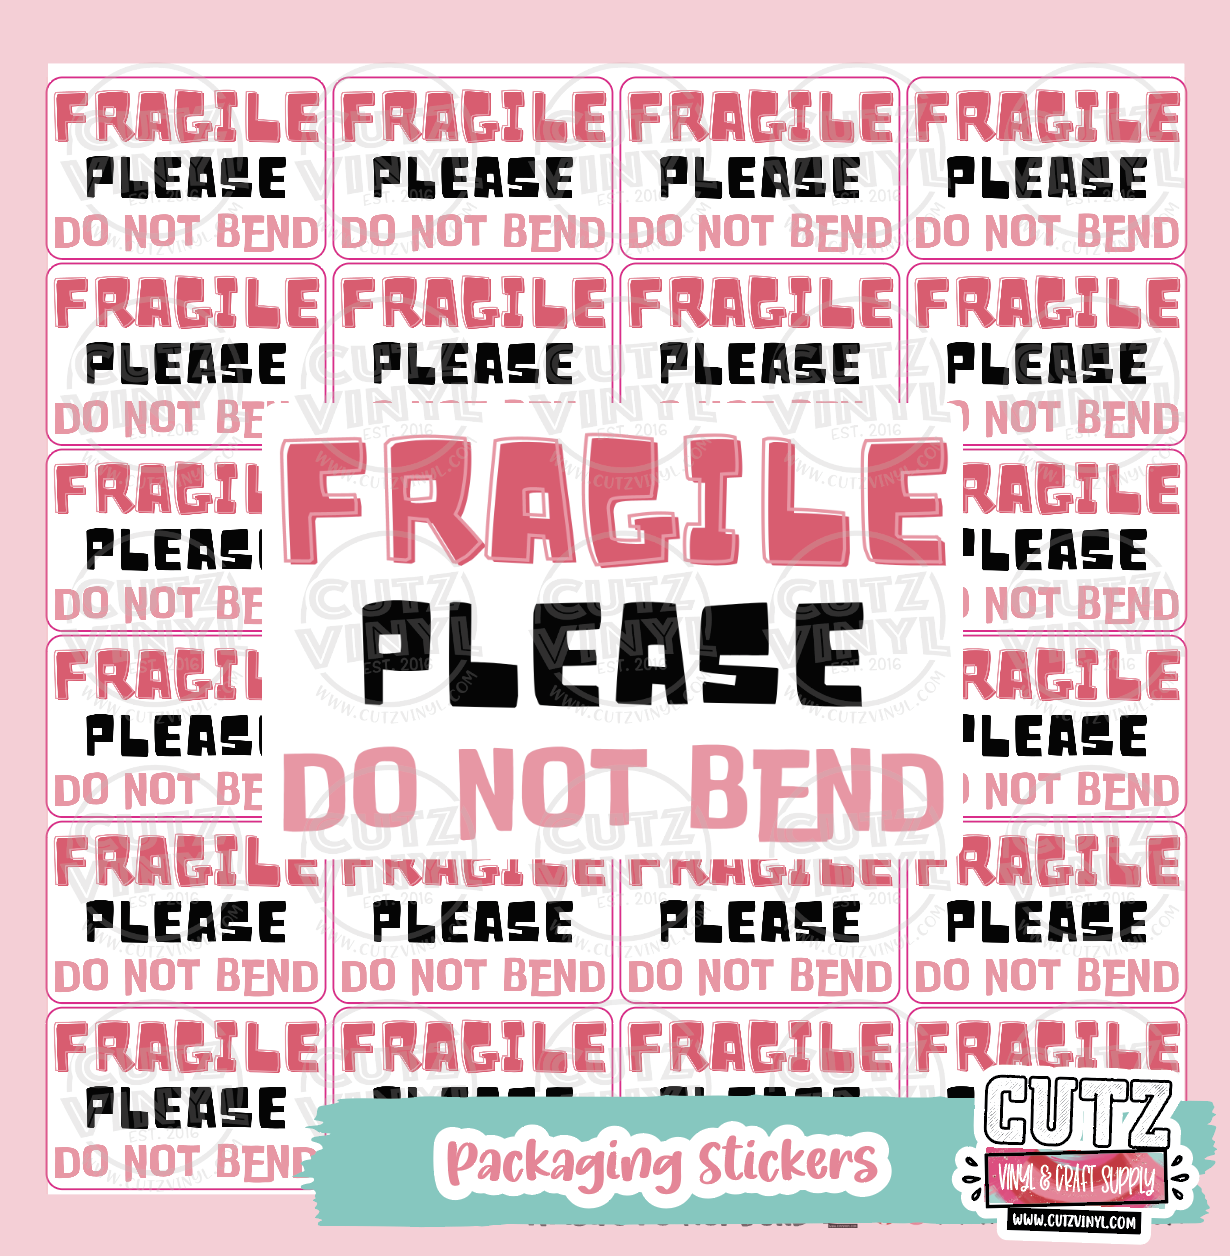 Fragile Do Not Bend Stickers